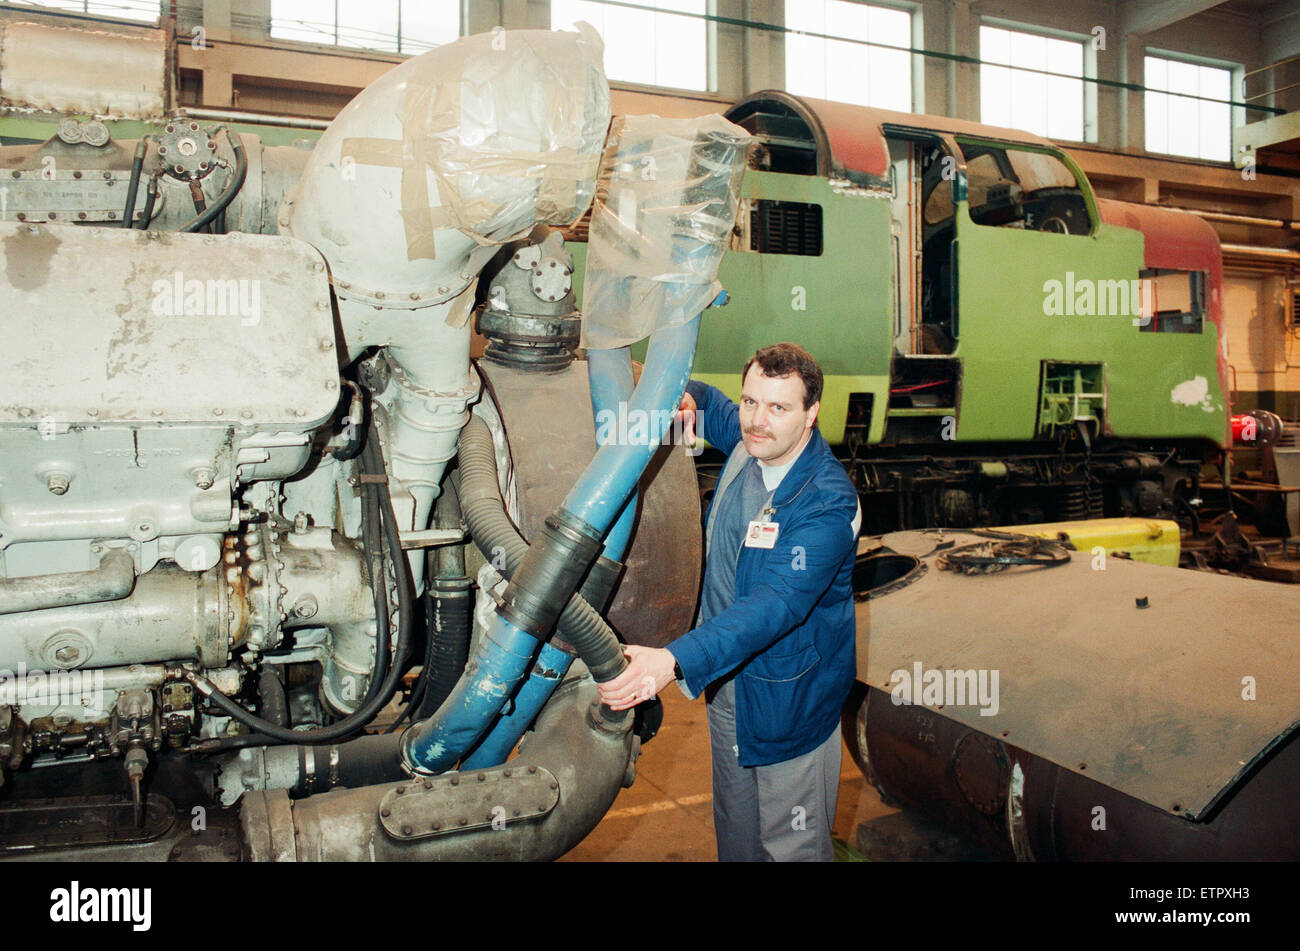 ICI Train Preservation, 4th January 1994. Terry Bye, with one of the two power units of the Deltic. The Napier Deltic valveless, two-stroke Diesel engine. Stock Photo